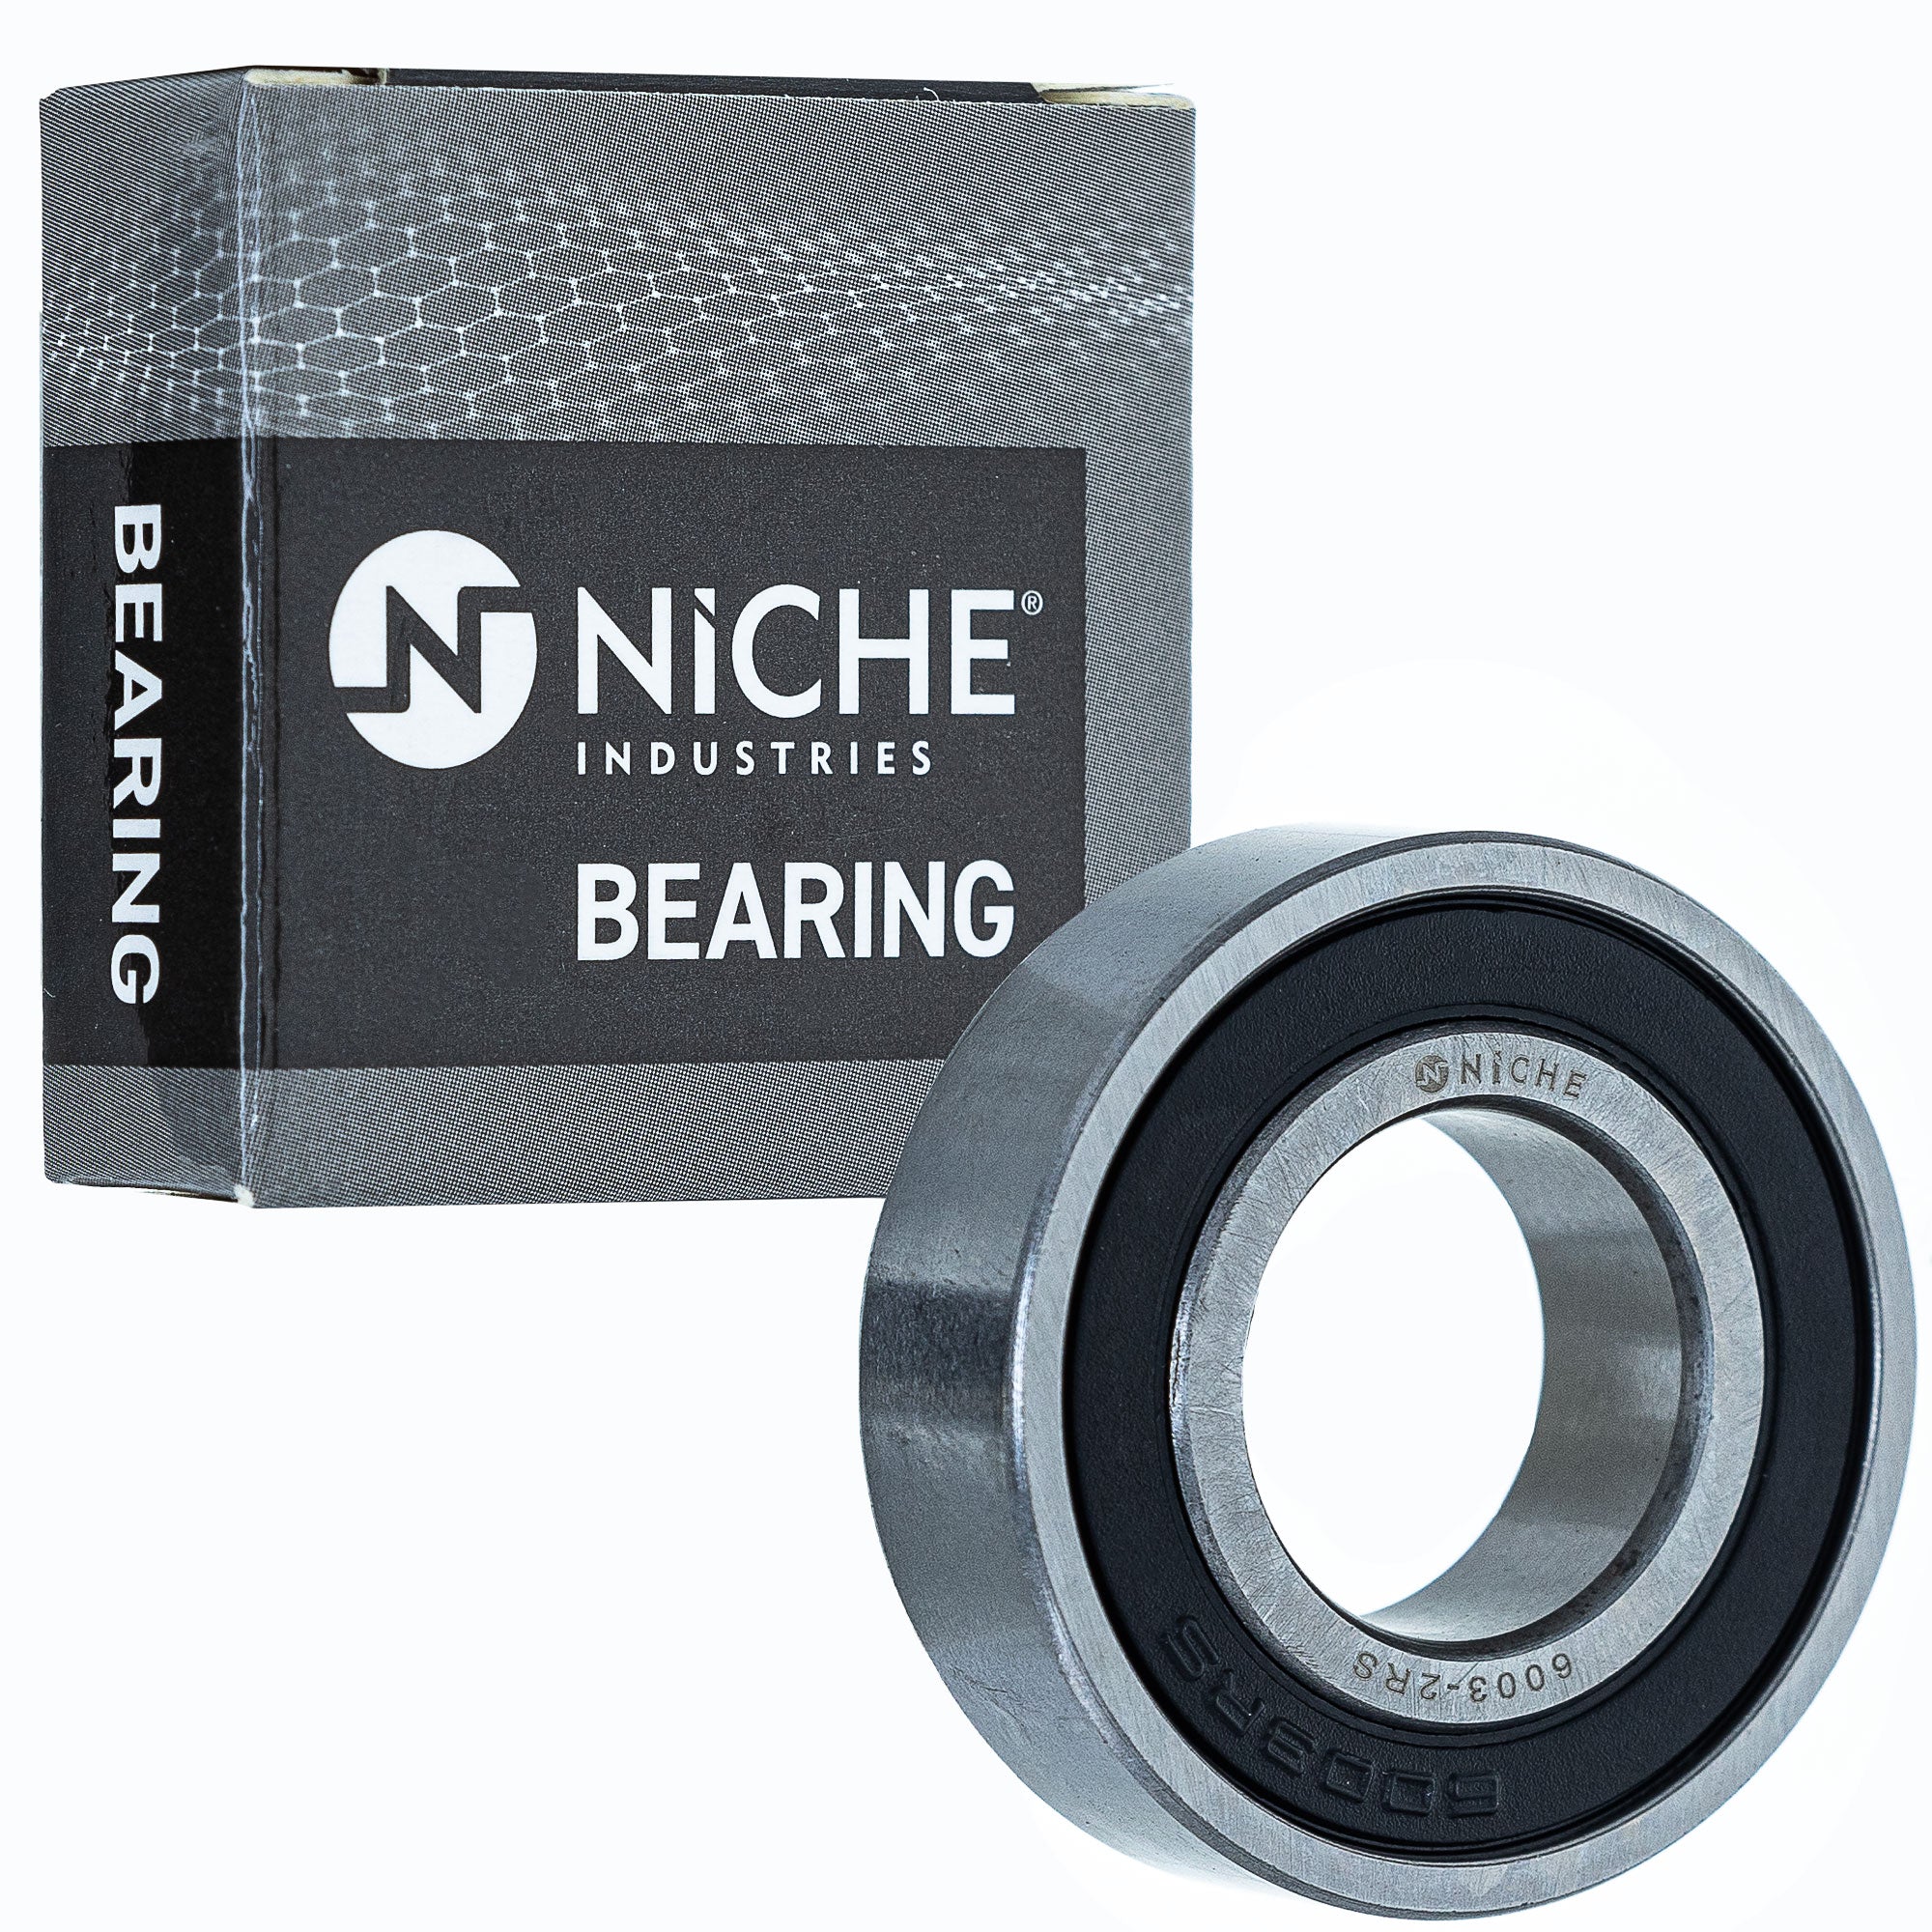 NICHE 519-CBB2238R Bearing 2-Pack for zOTHER Arctic Cat Textron